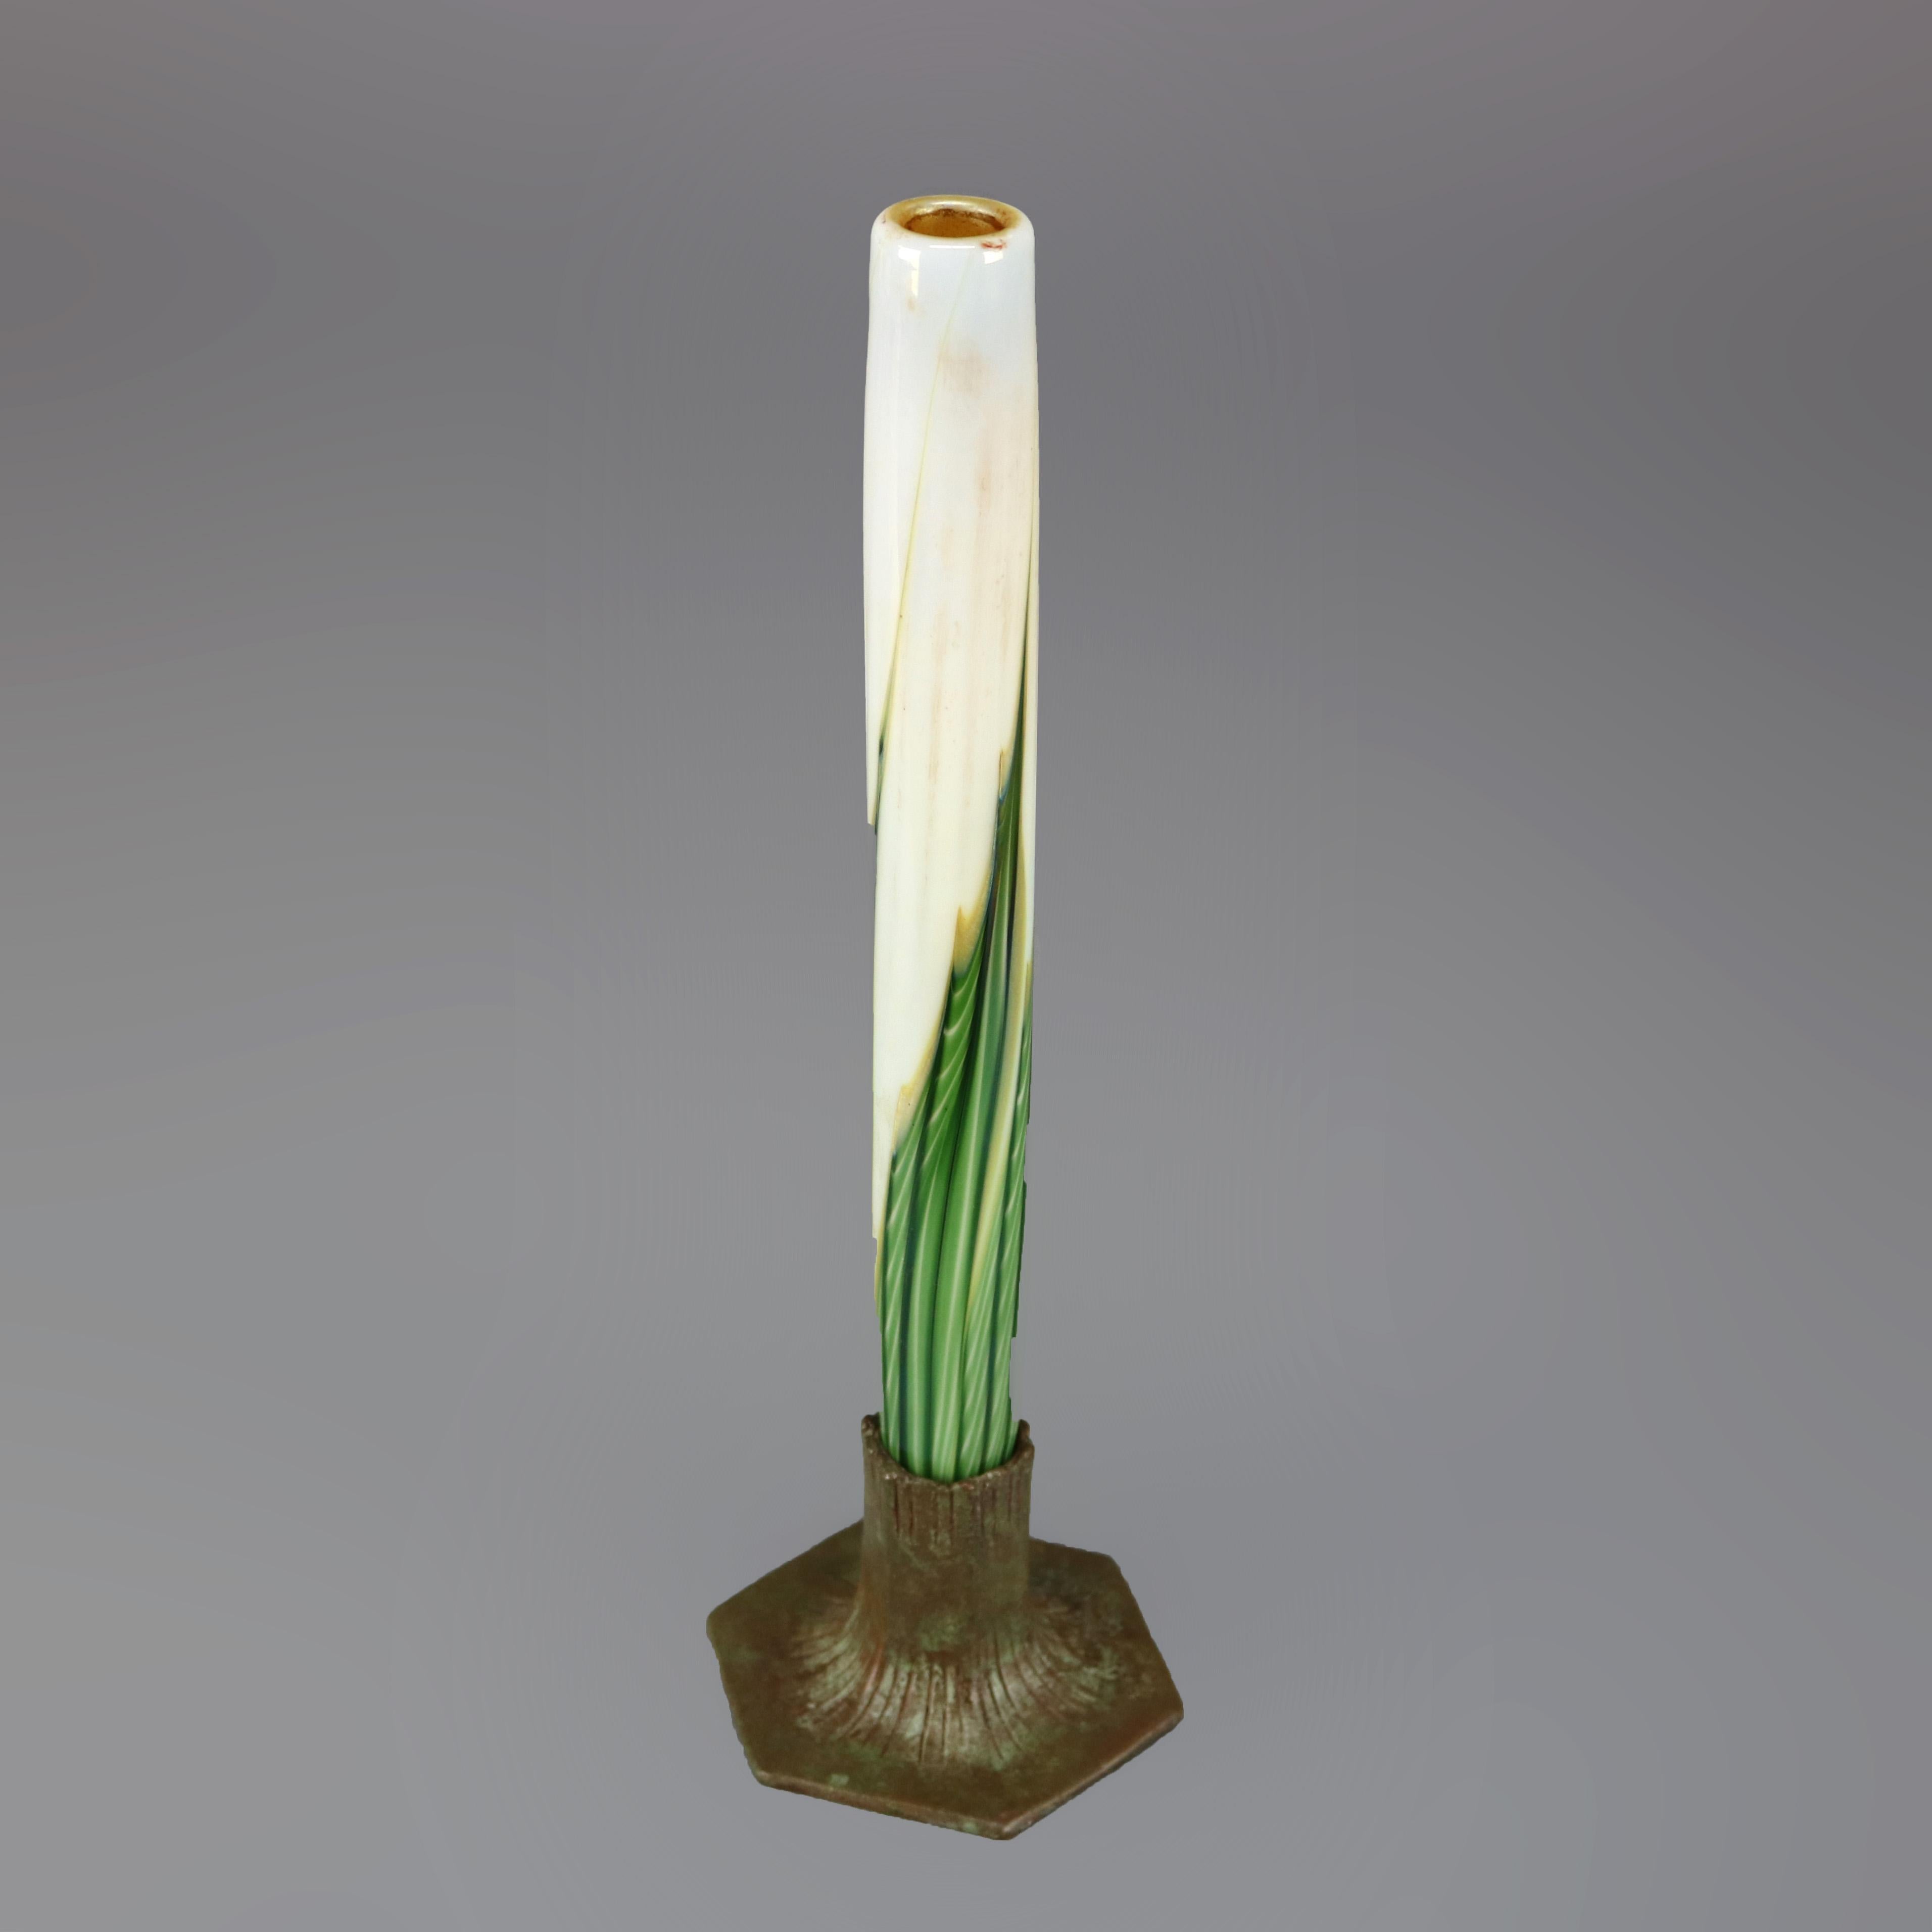 An antique bud vase in the manner of Tiffany offers art glass cylindrical vessel with green, gold and white pulled feather design, gold wash interior and seated in scored cast bronze base with hexagonal foot, base later added stamp as photographed,